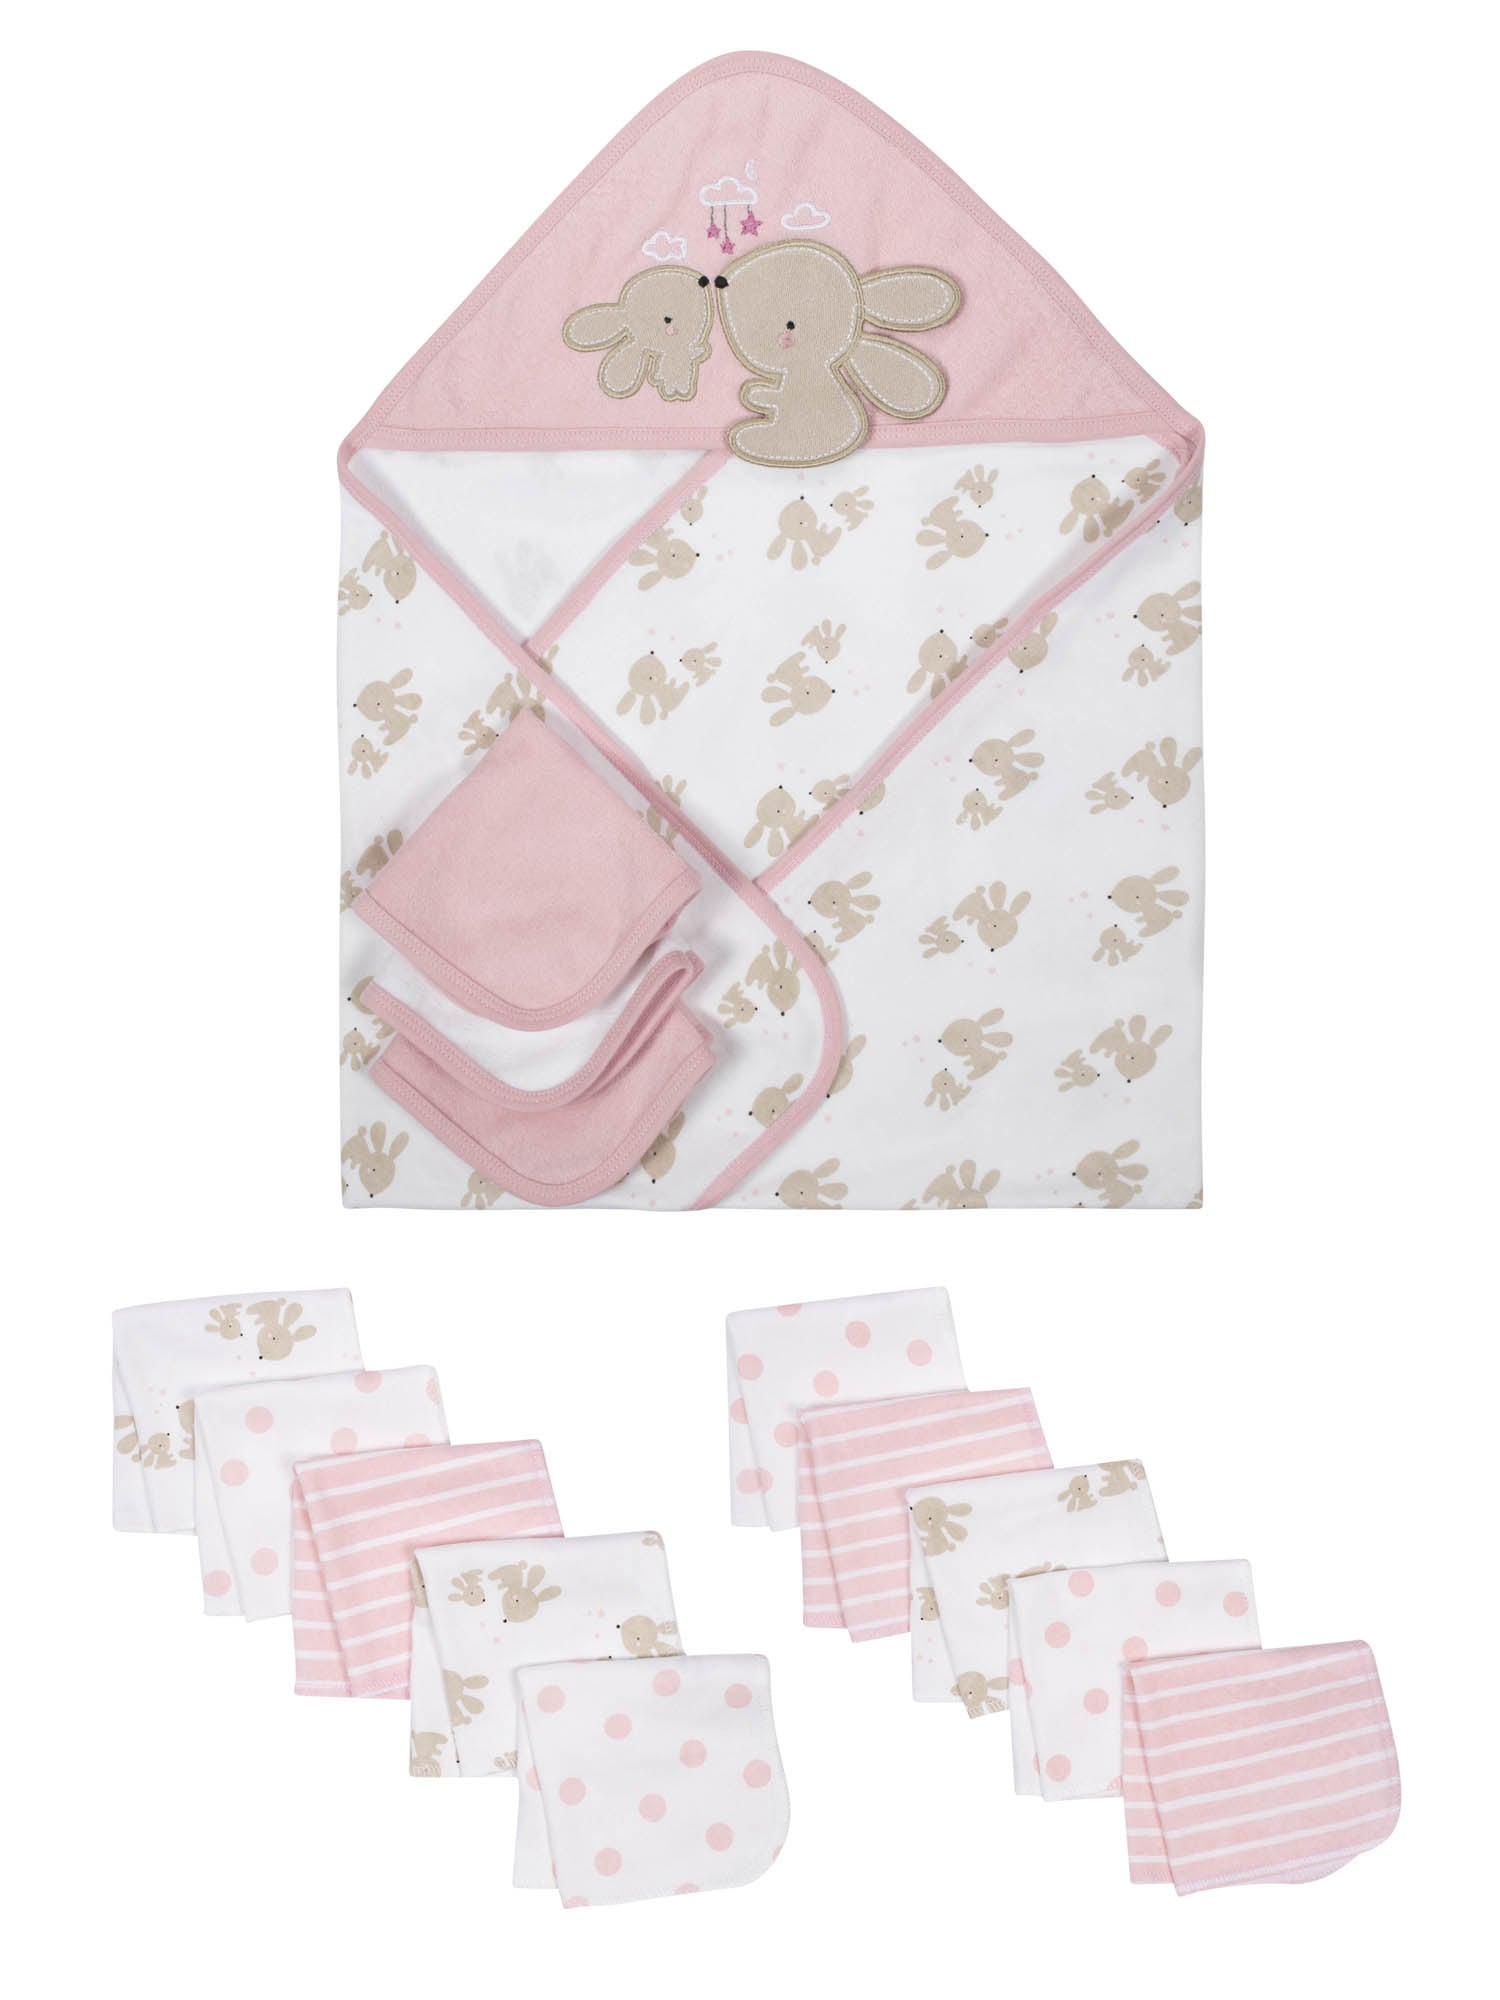 Wonder Nation Baby Girls Hooded Towel and Washcloth Set, 14-Piece